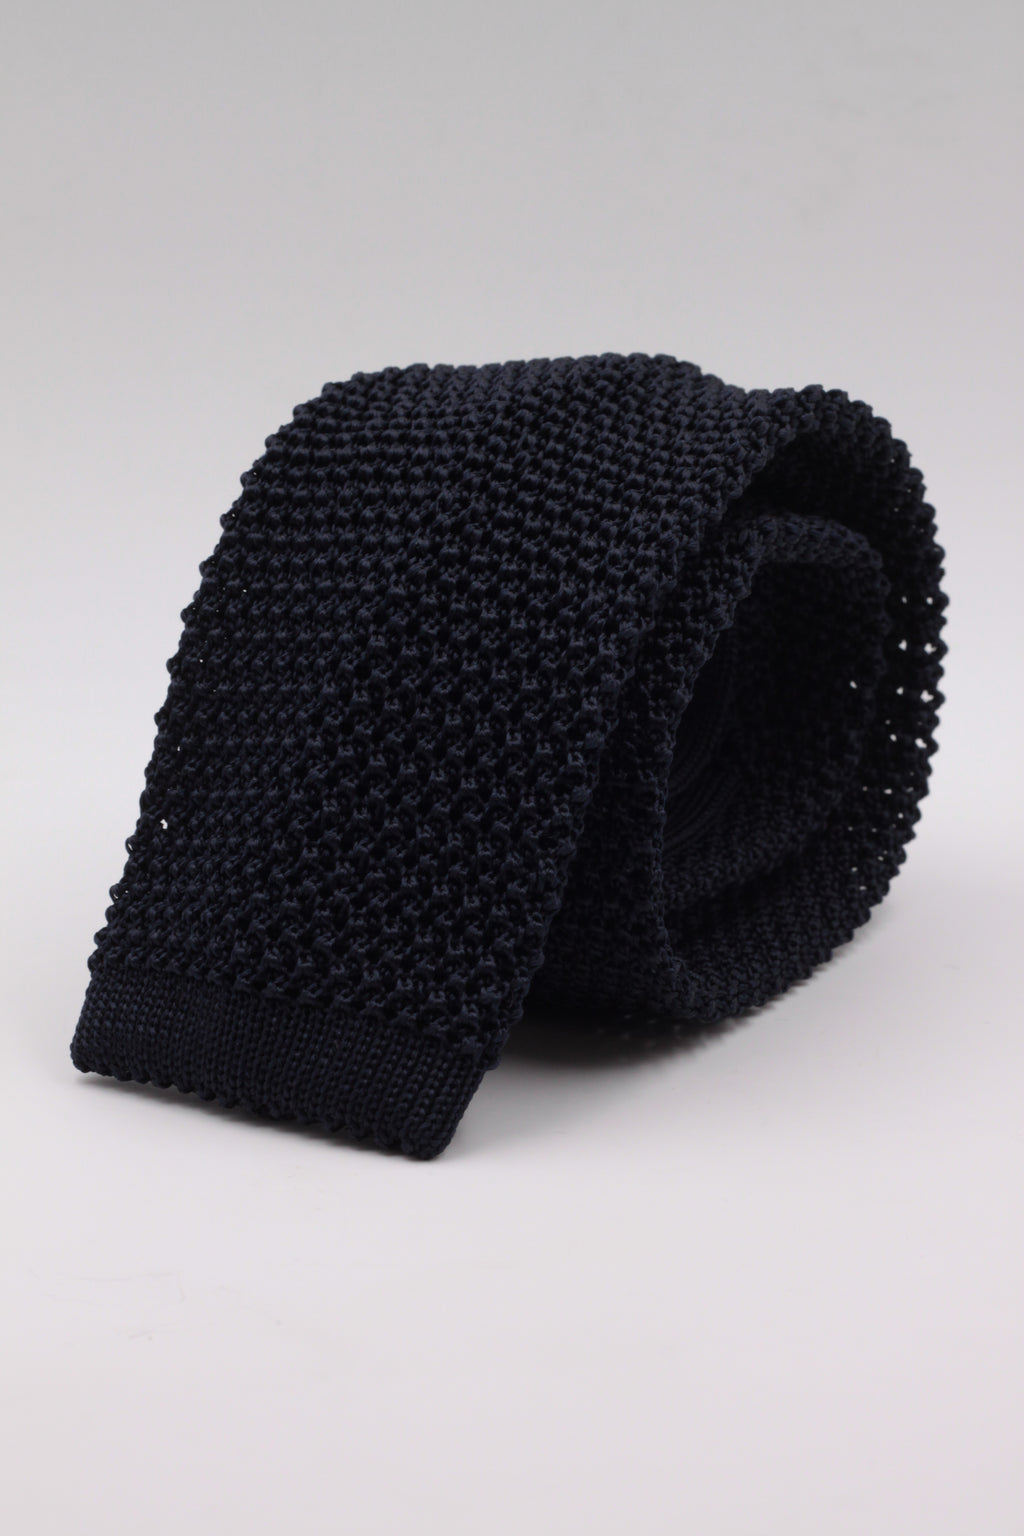 Navy blue knitted tie